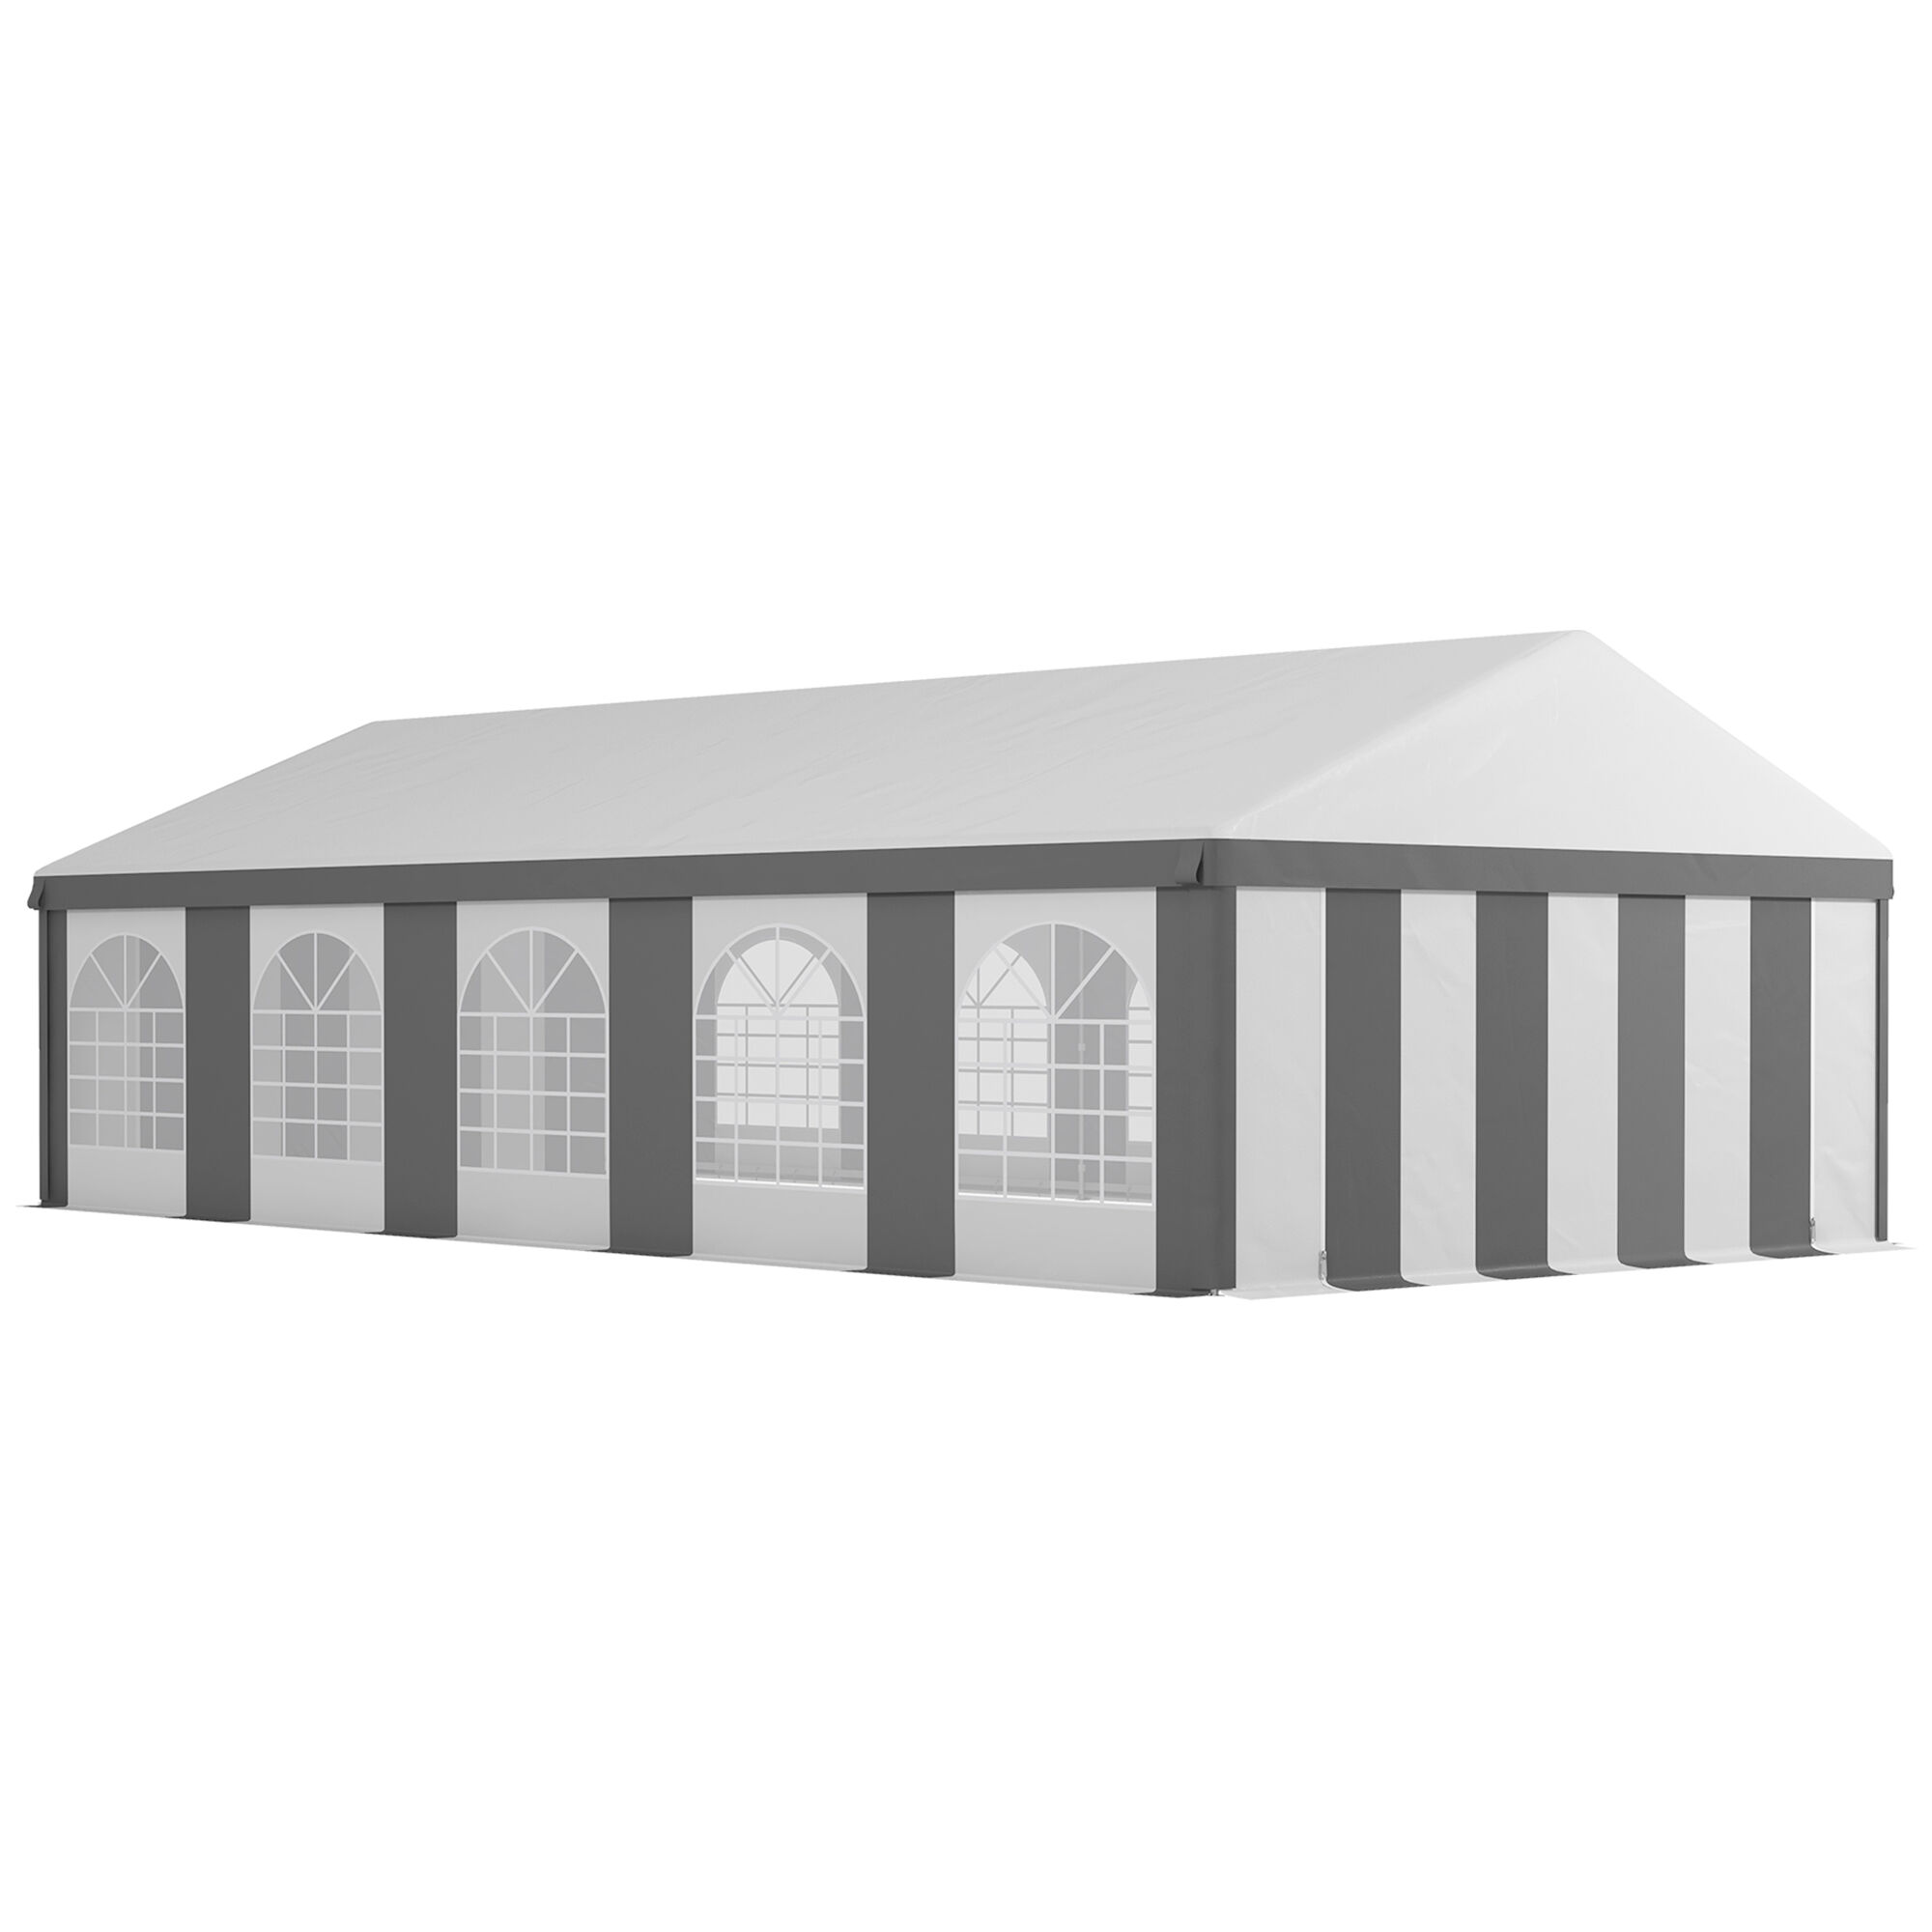 Outsunny 20' x 33' Heavy-Duty Large Wedding Tent, Outdoor Carport Garage Party Tent, Patio Gazebo Canopy with Sidewall, Gray